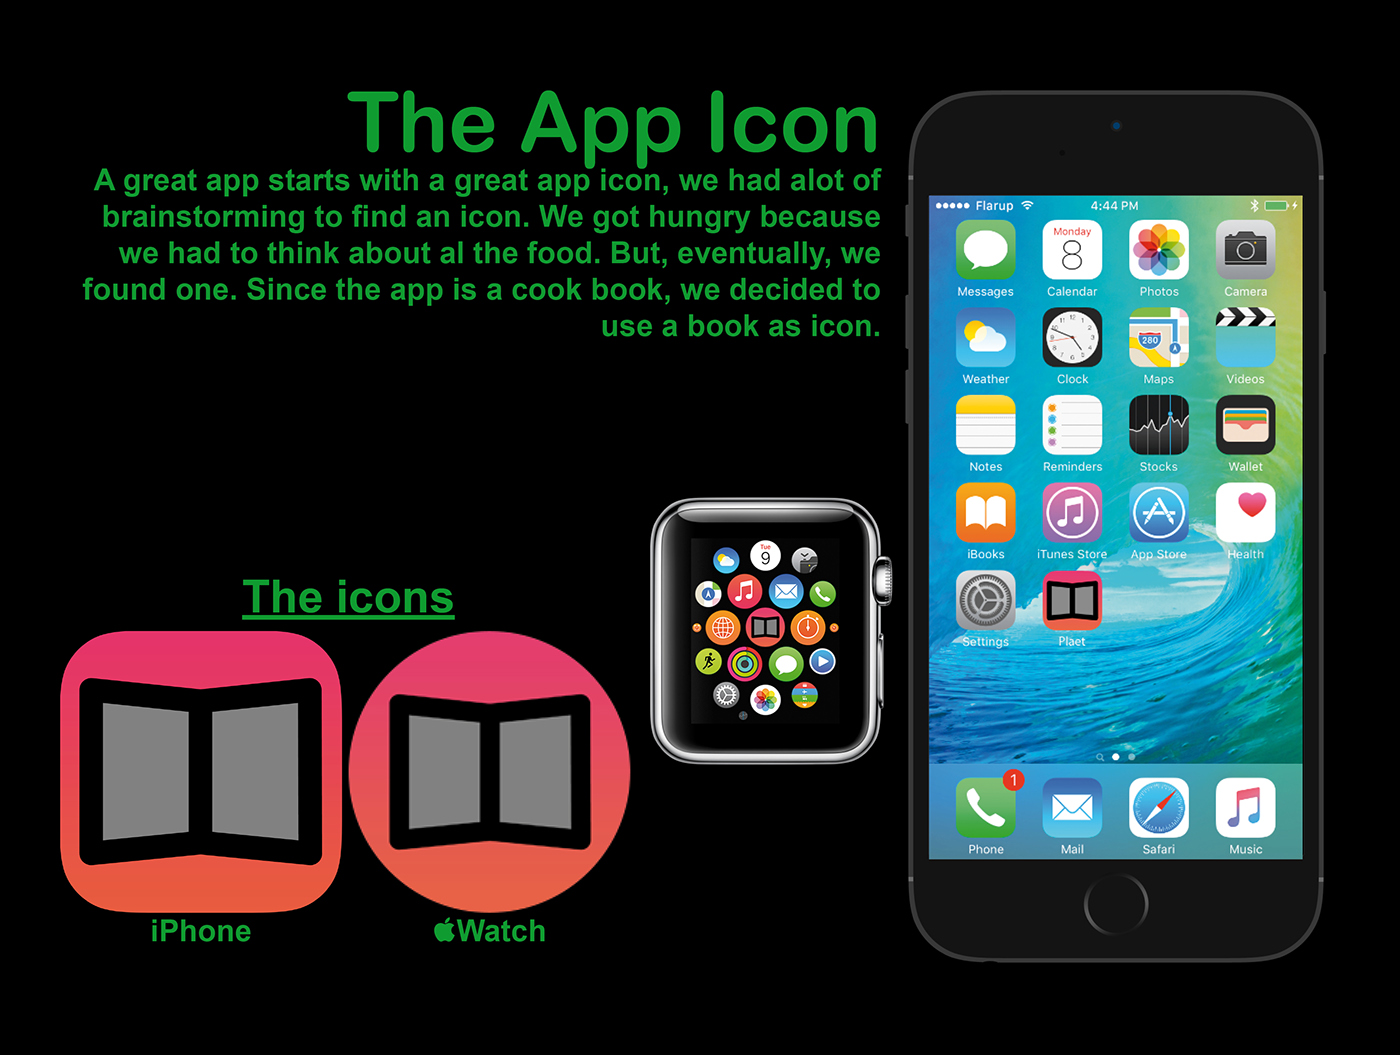 mobile iphone app Pleat plate design Icon cook recipe book community social netwerk network Collaboration